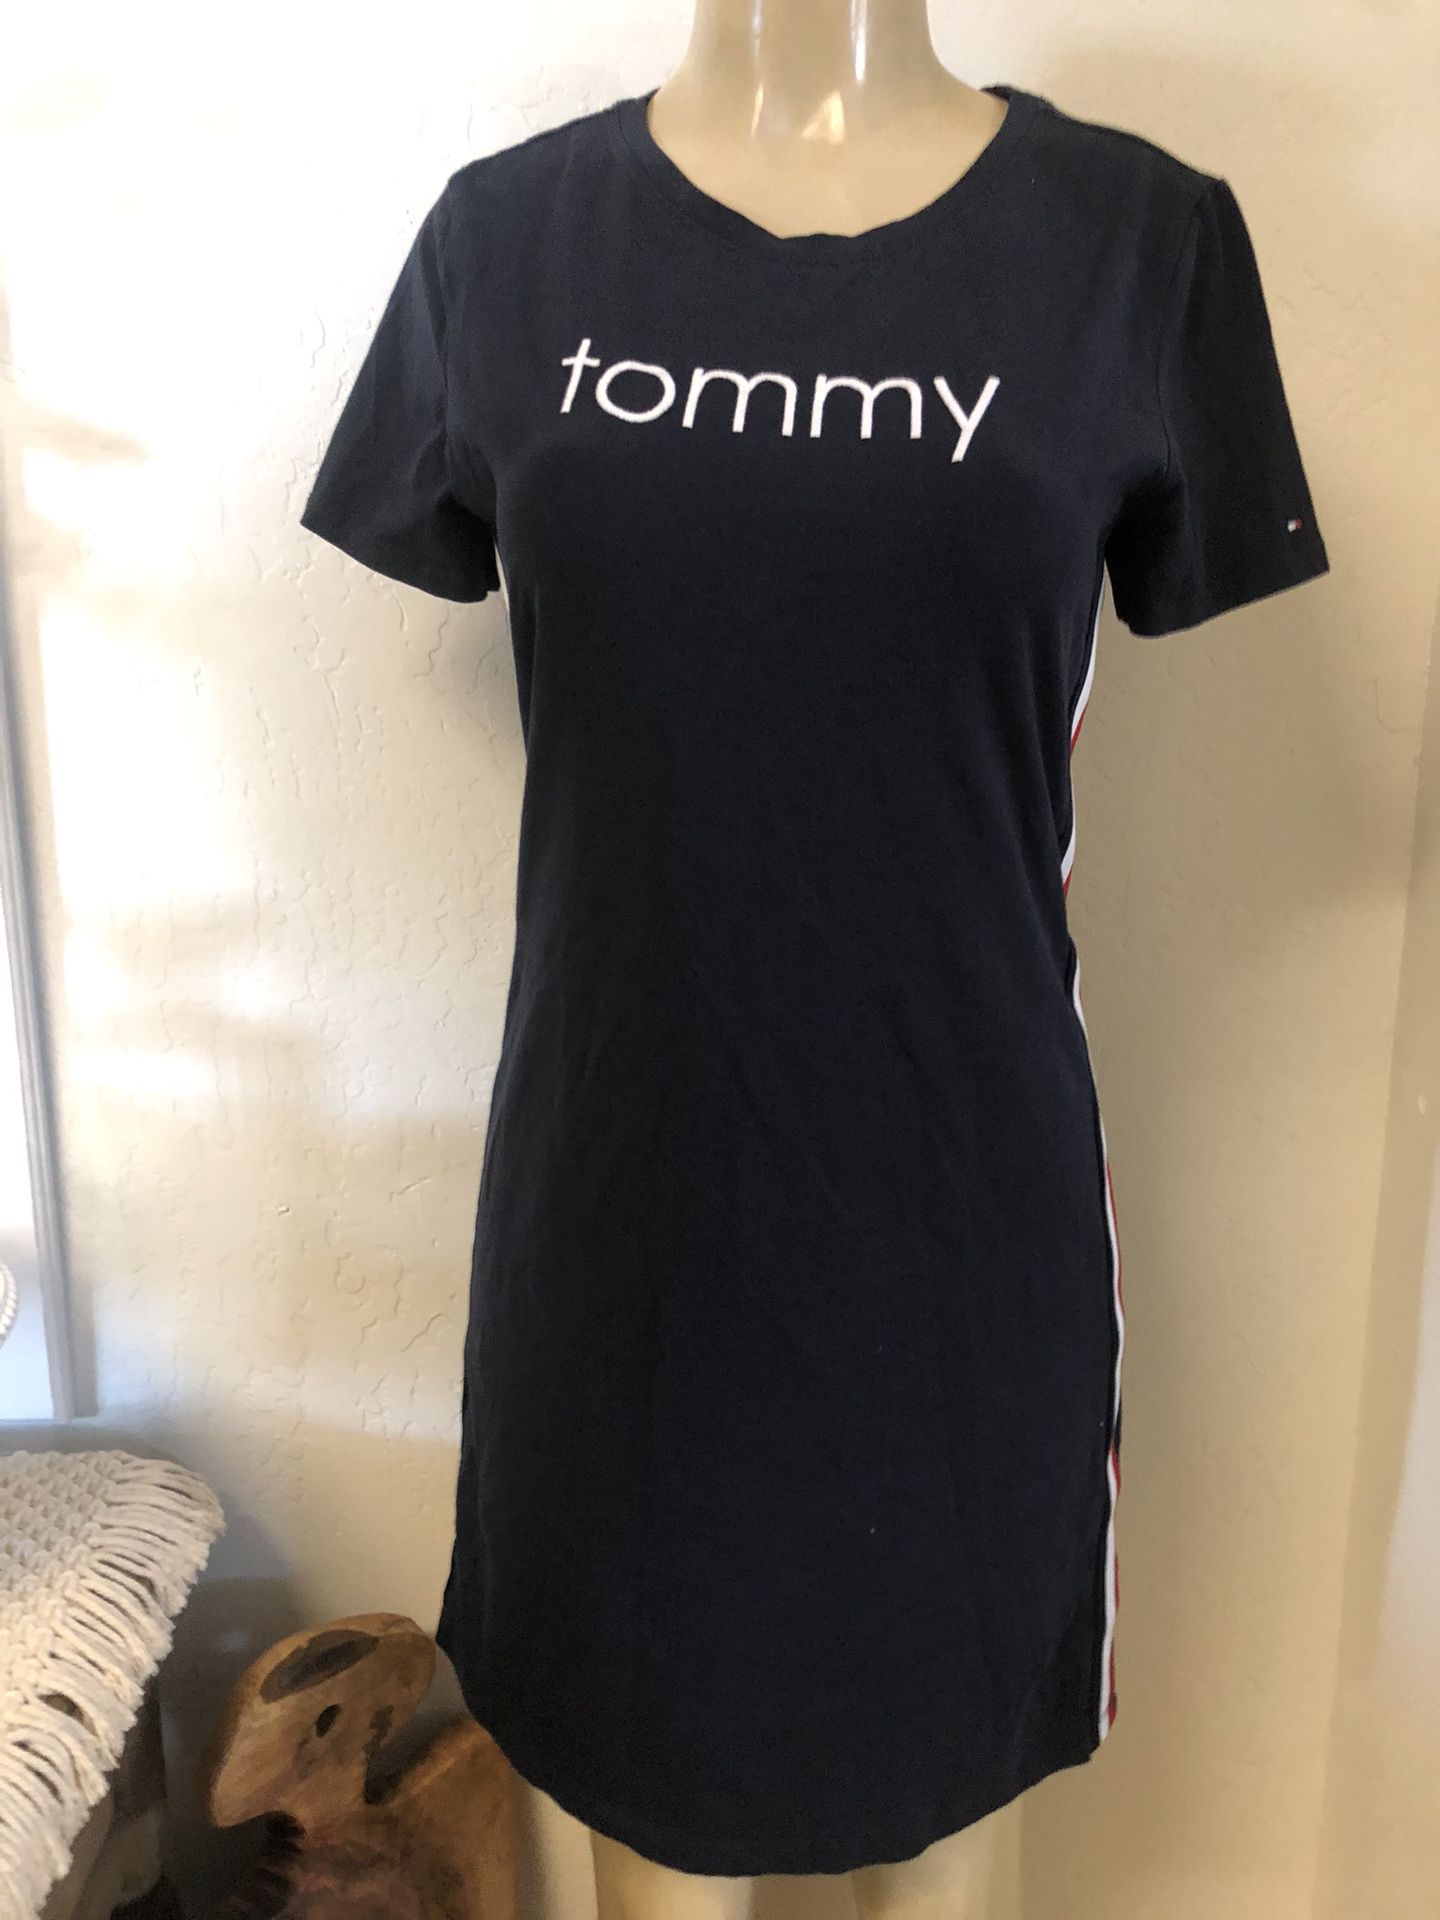 Tommy Dress Size Small